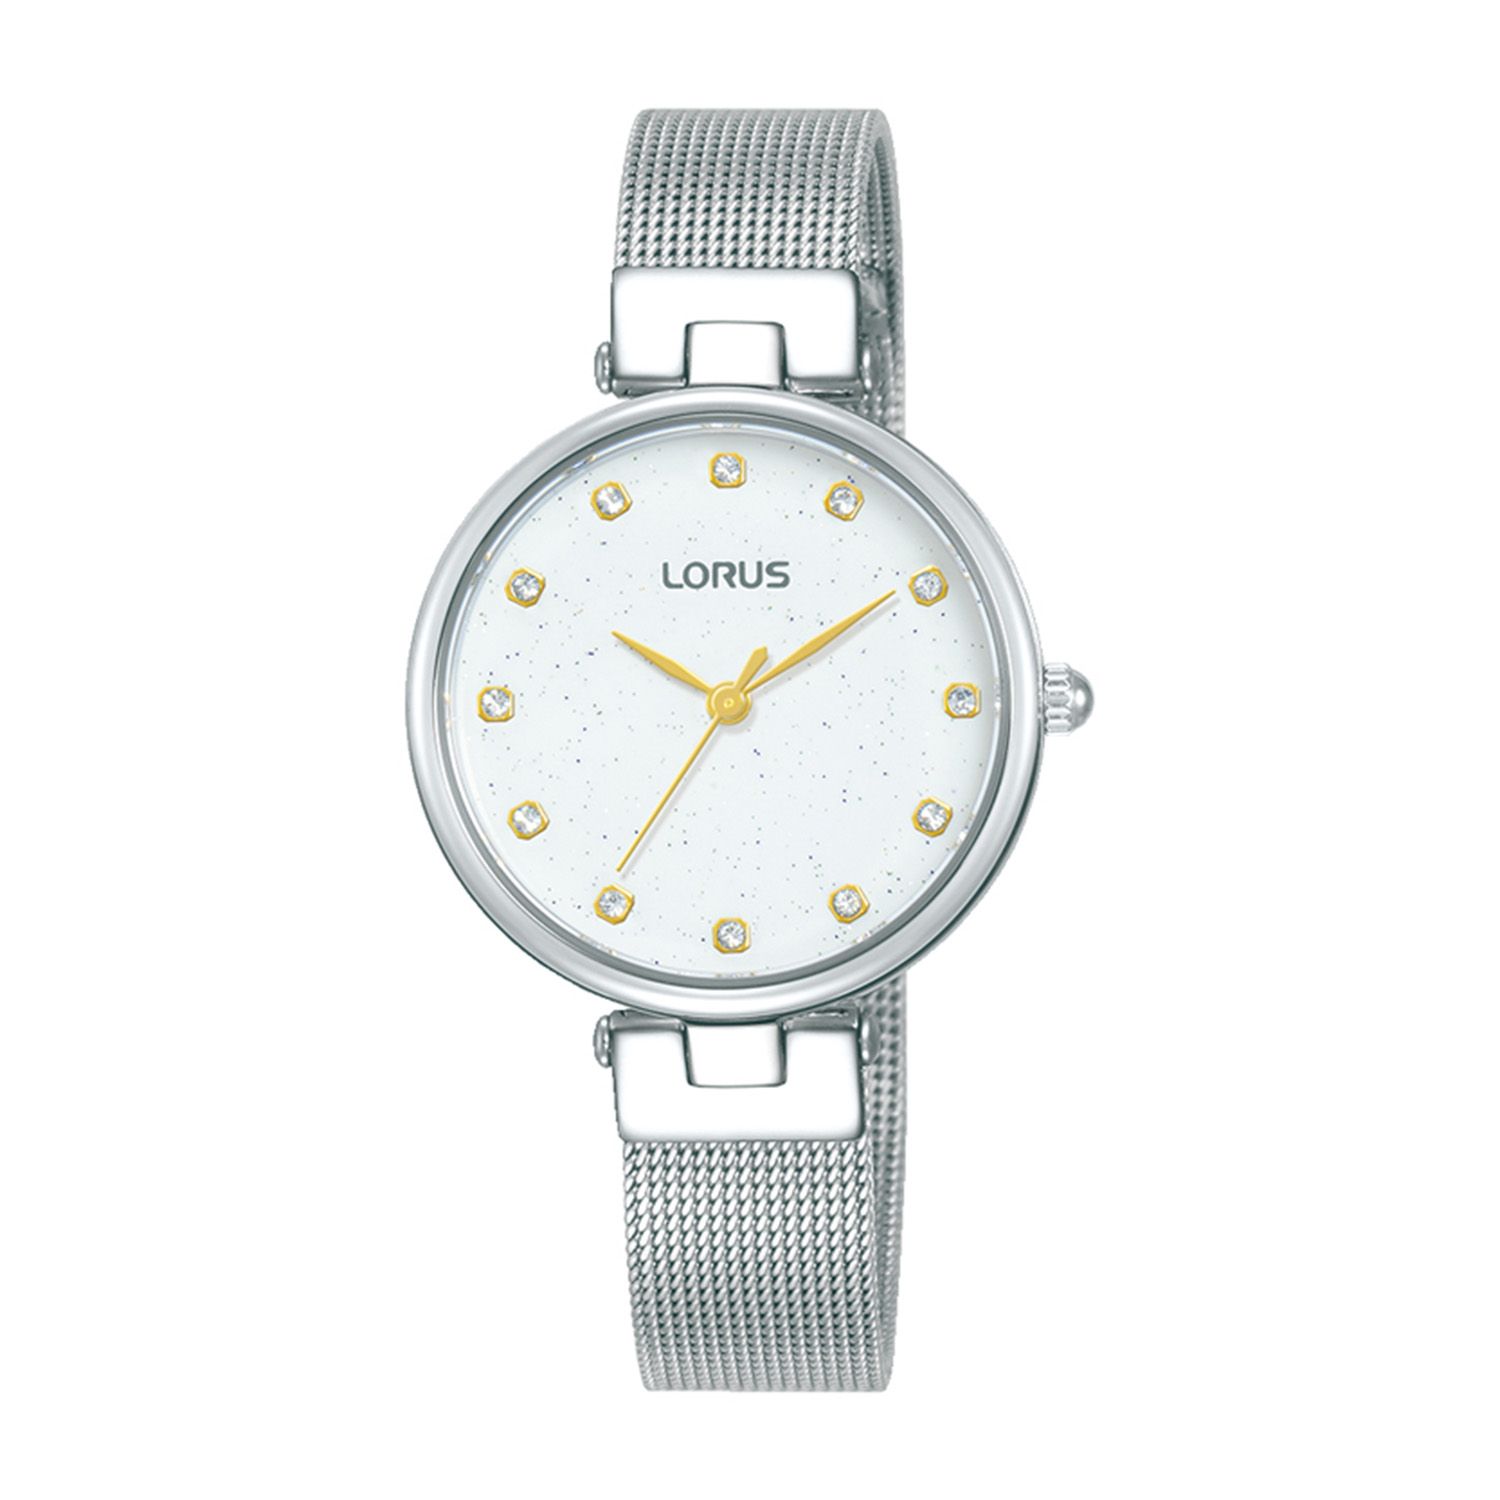 Womens watch LORUS in silver stainless steel with white dial and bracelet.